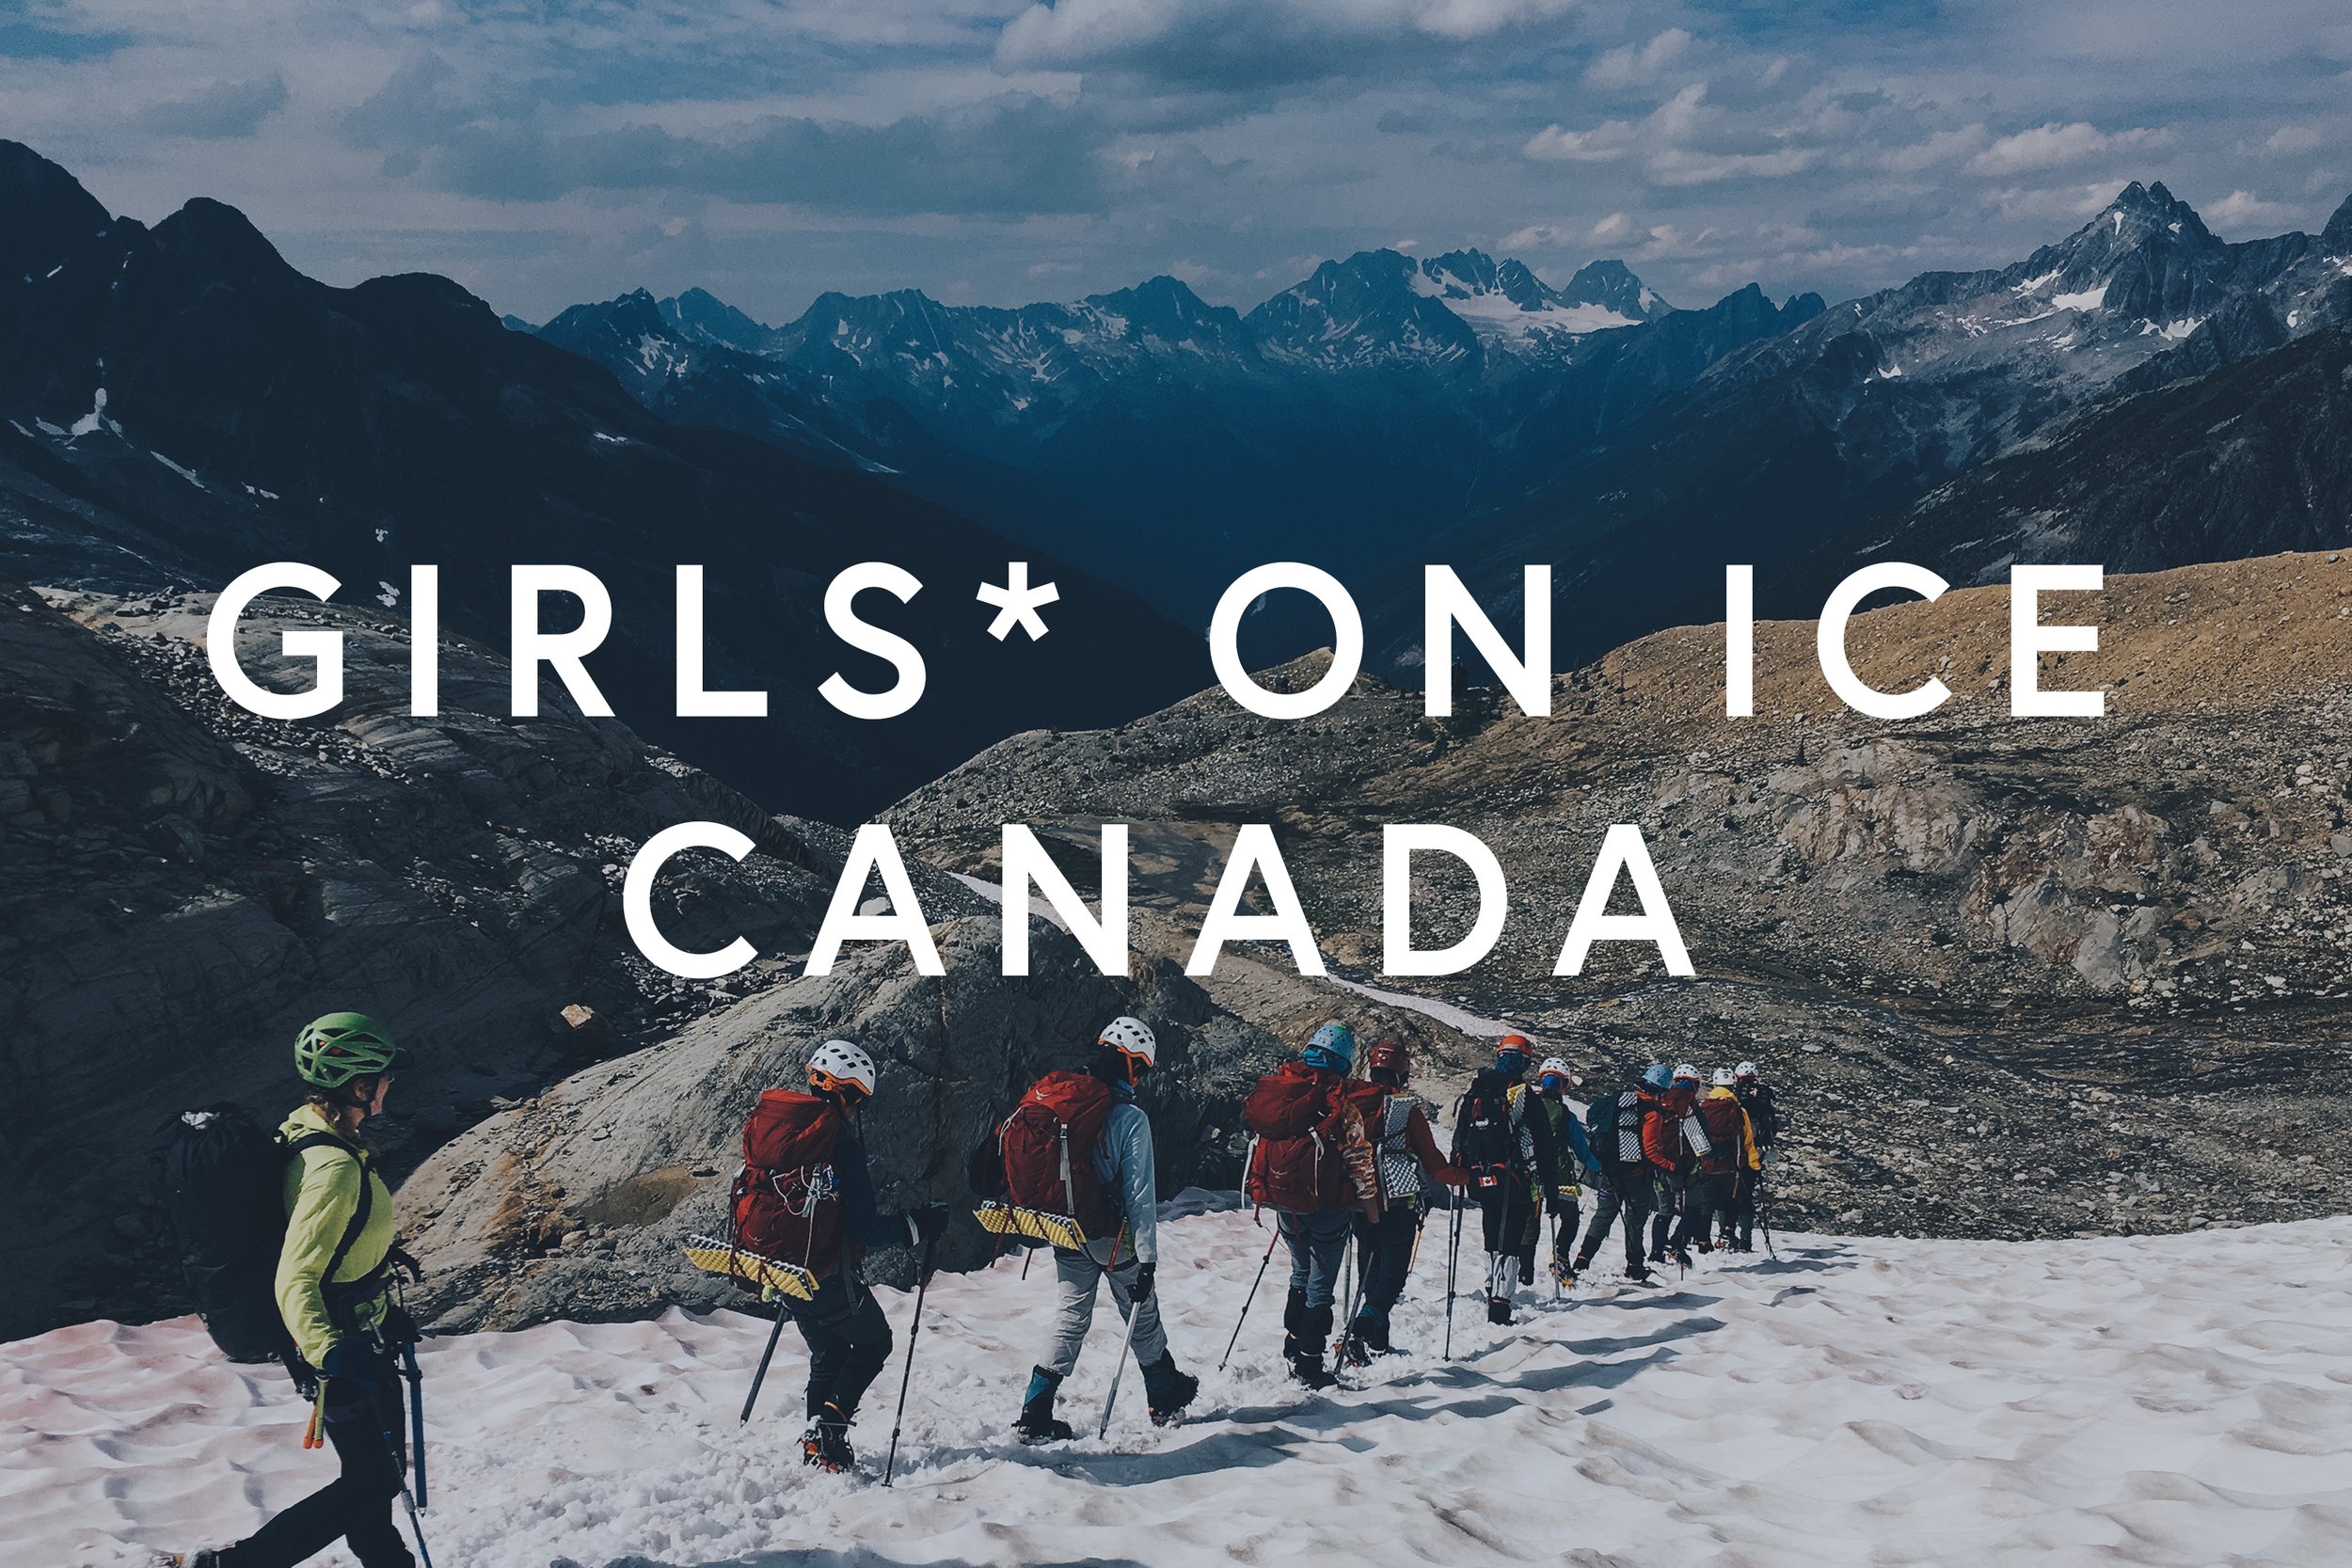 Image links to the Girls* on Ice Canada branch webpage